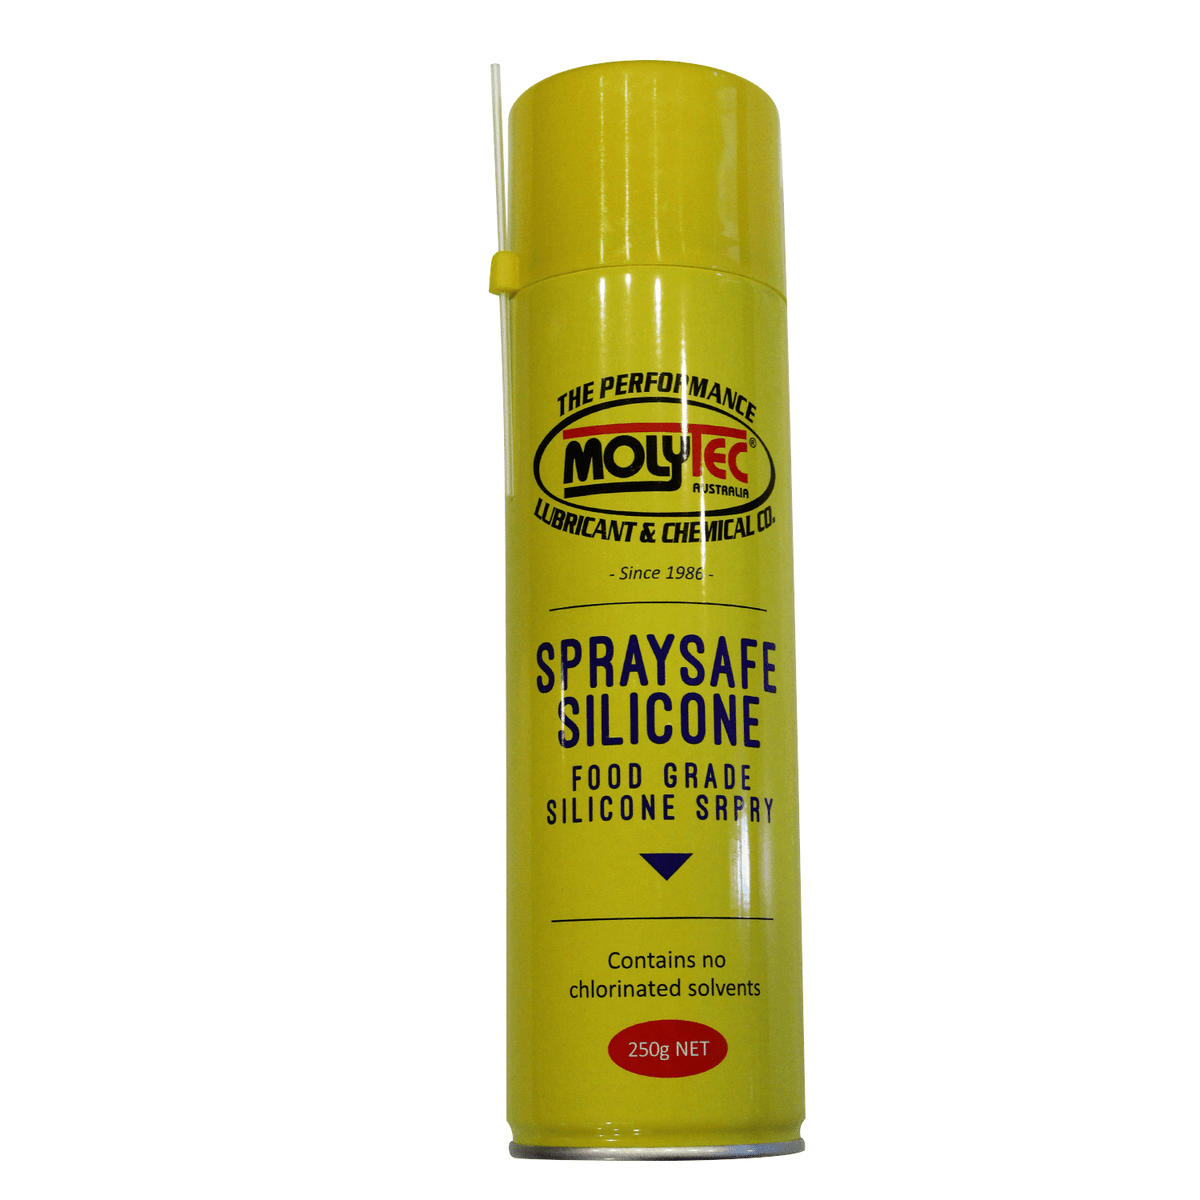 SpraySafe Silicone - Leak-Proof Protection for Your Needs